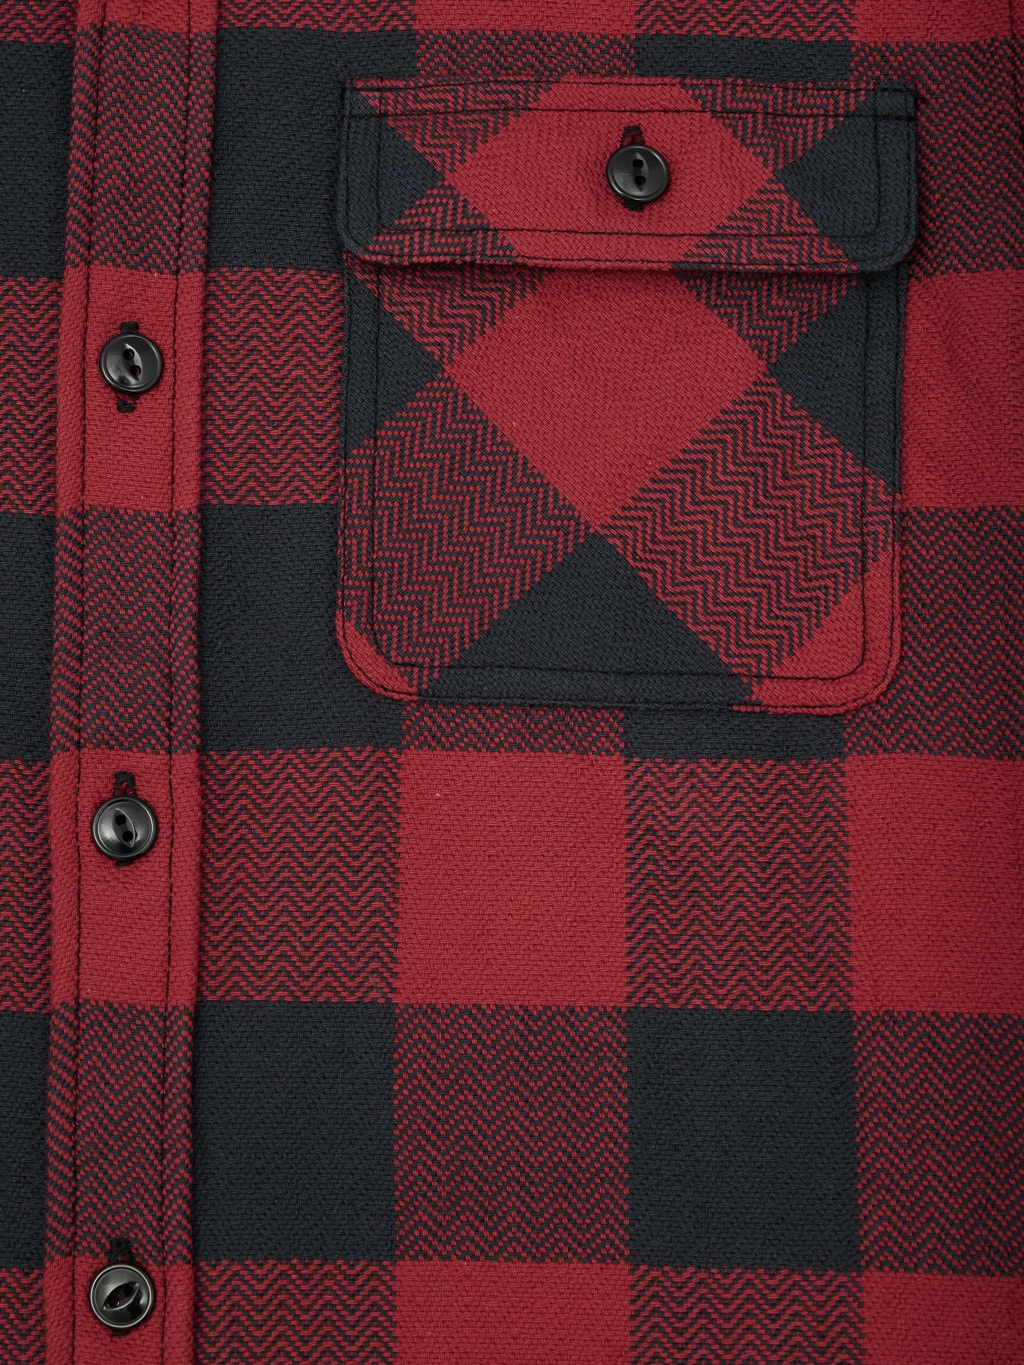 the flat head block check flannel shirt black red chest pocket